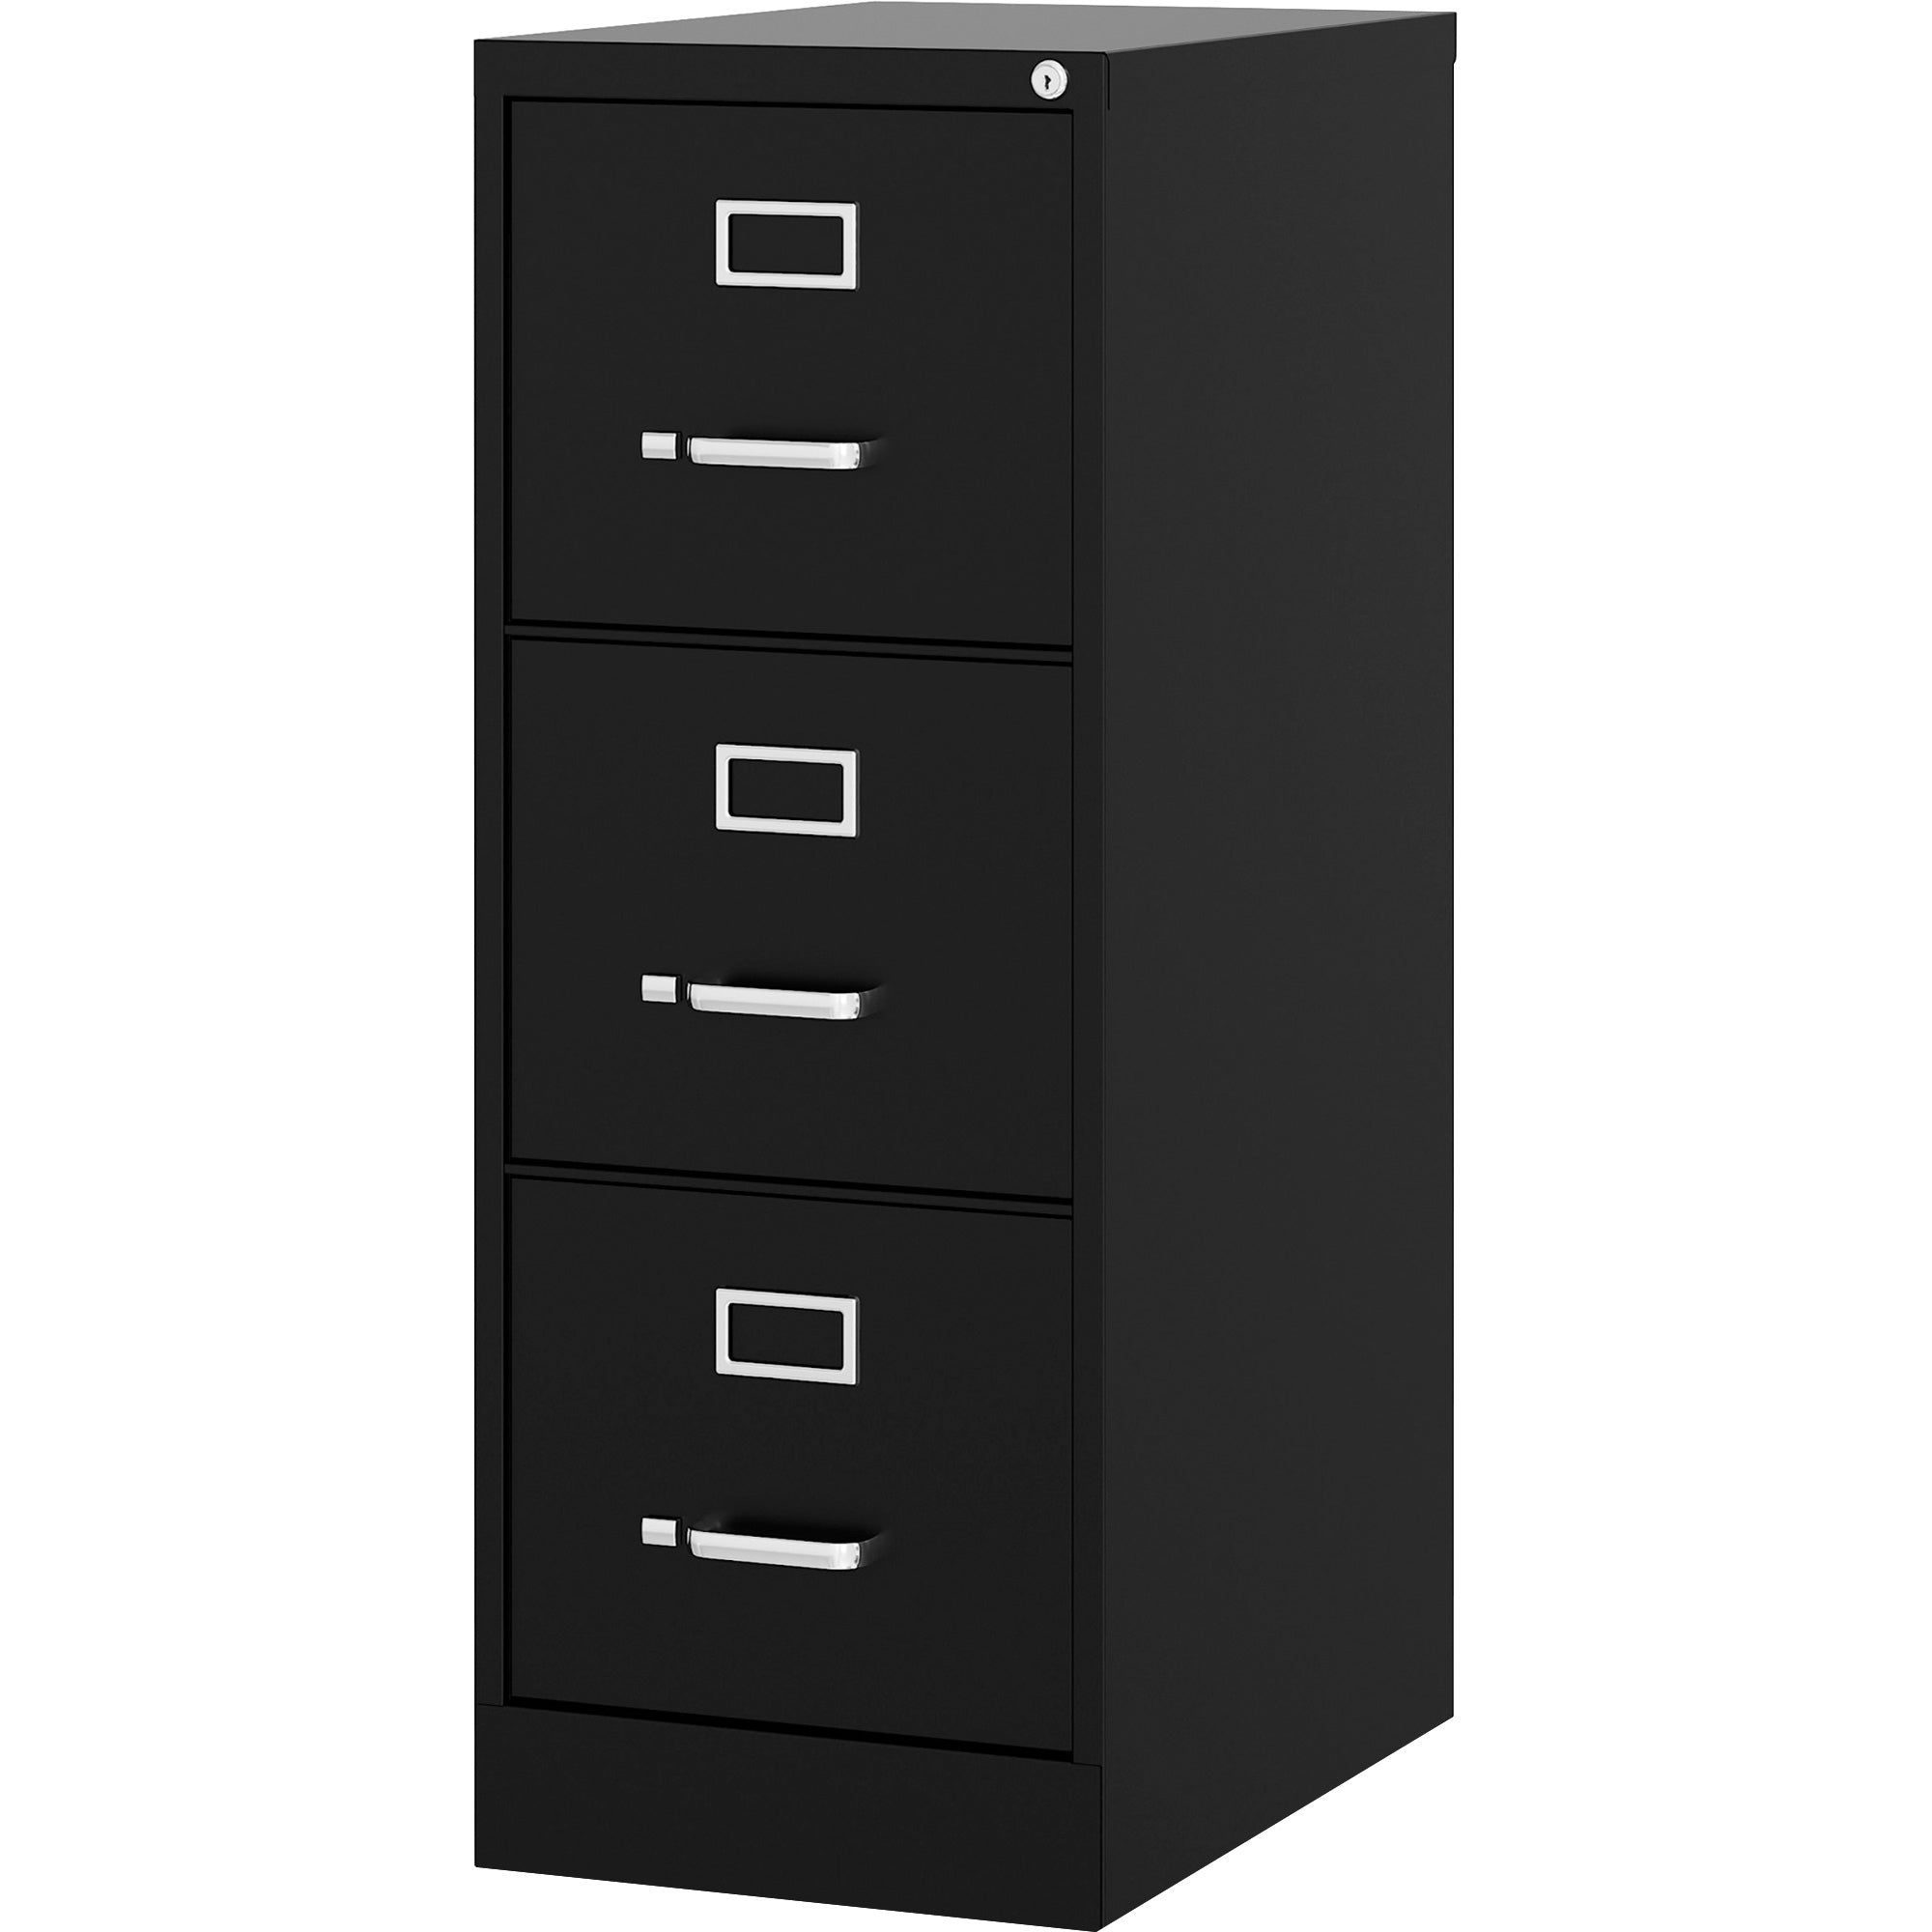 lorell-fortress-series-22-commercial-grade-vertical-file-cabinet-15-x-22-x-402-3-x-drawers-for-file-letter-vertical-ball-bearing-suspension-removable-lock-pull-handle-wire-management-black-steel-recycled_llr42297 - 3